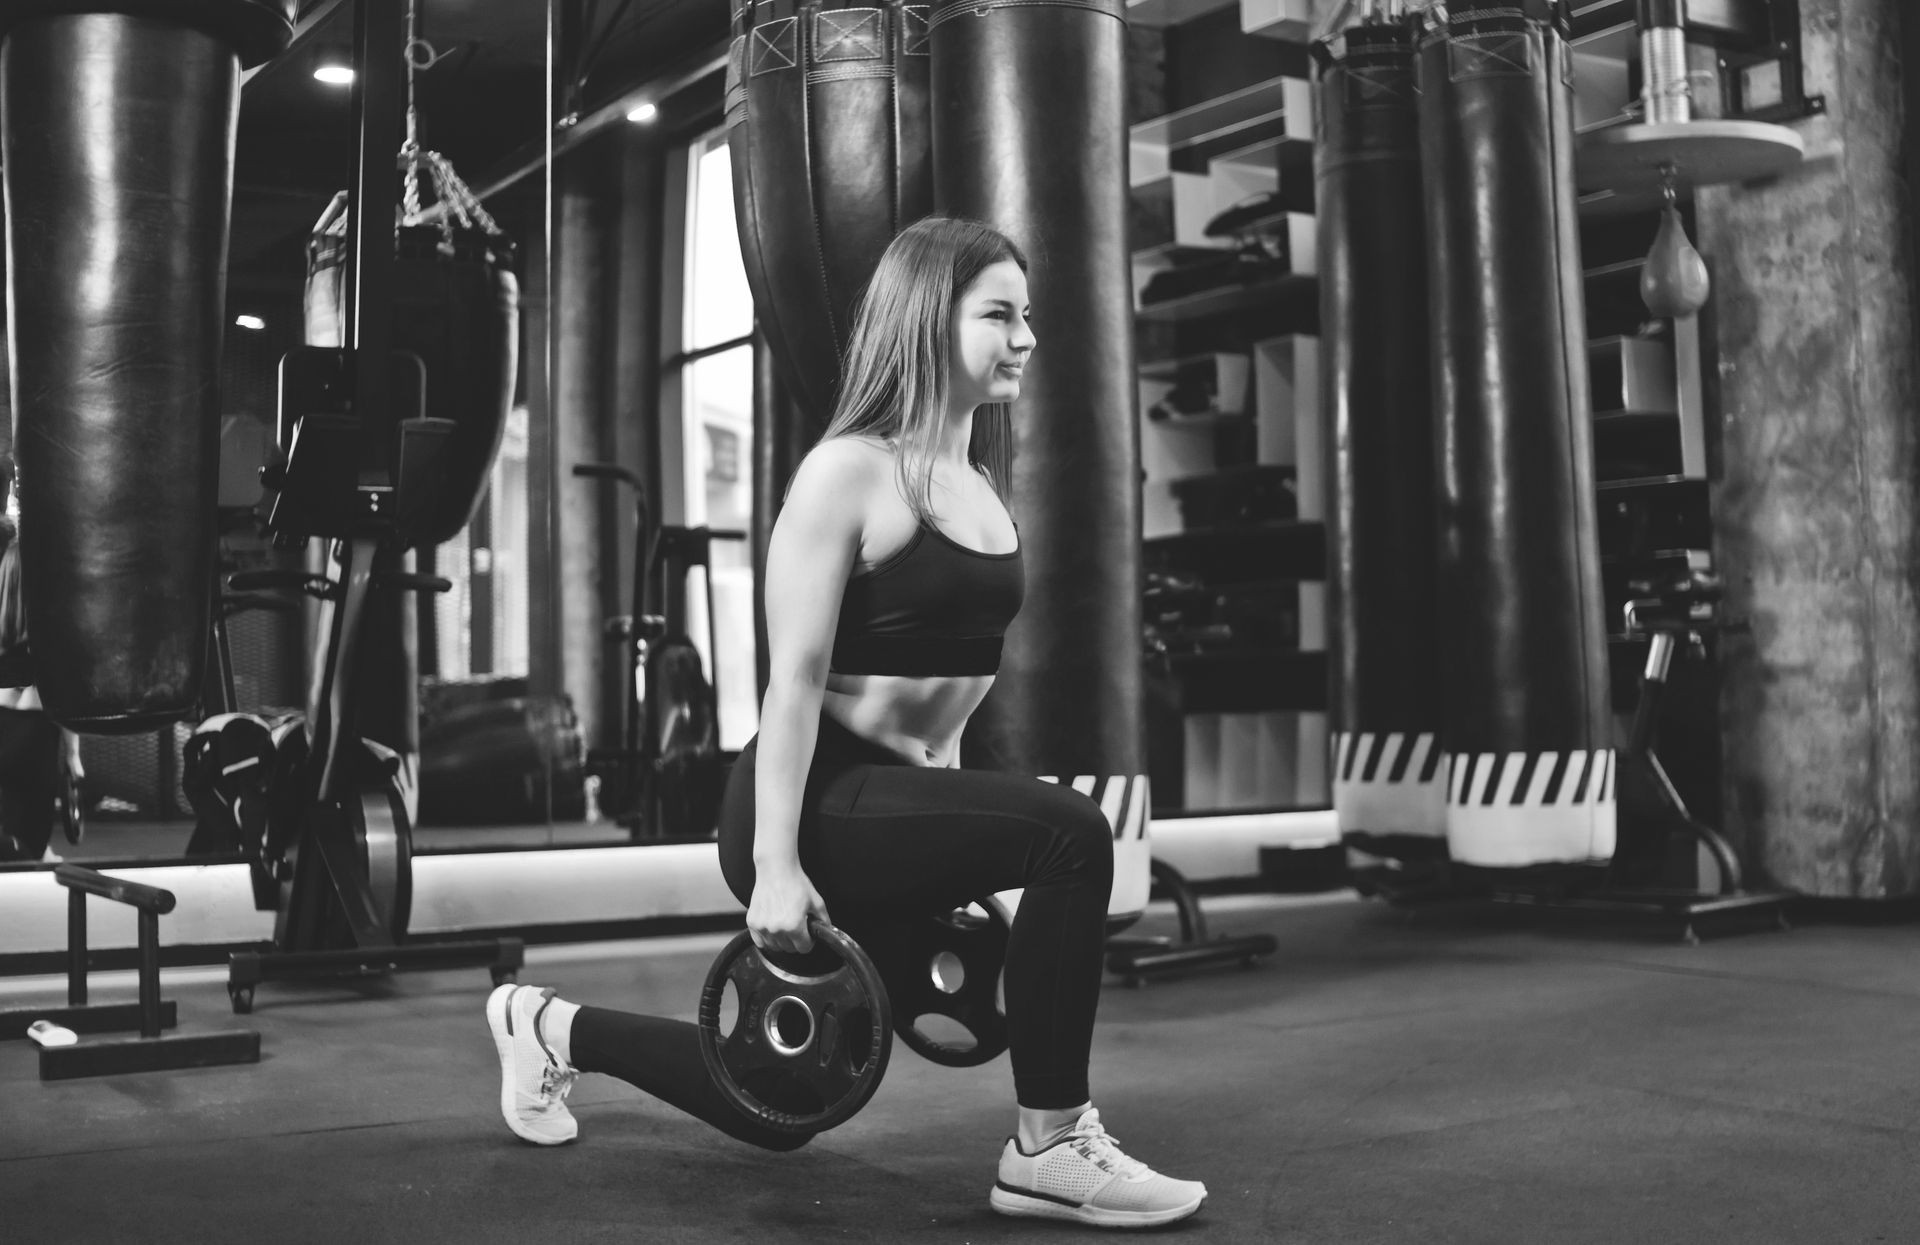 Training legs in the gym. Attractive fit woman doing lunges with discs from the bar.